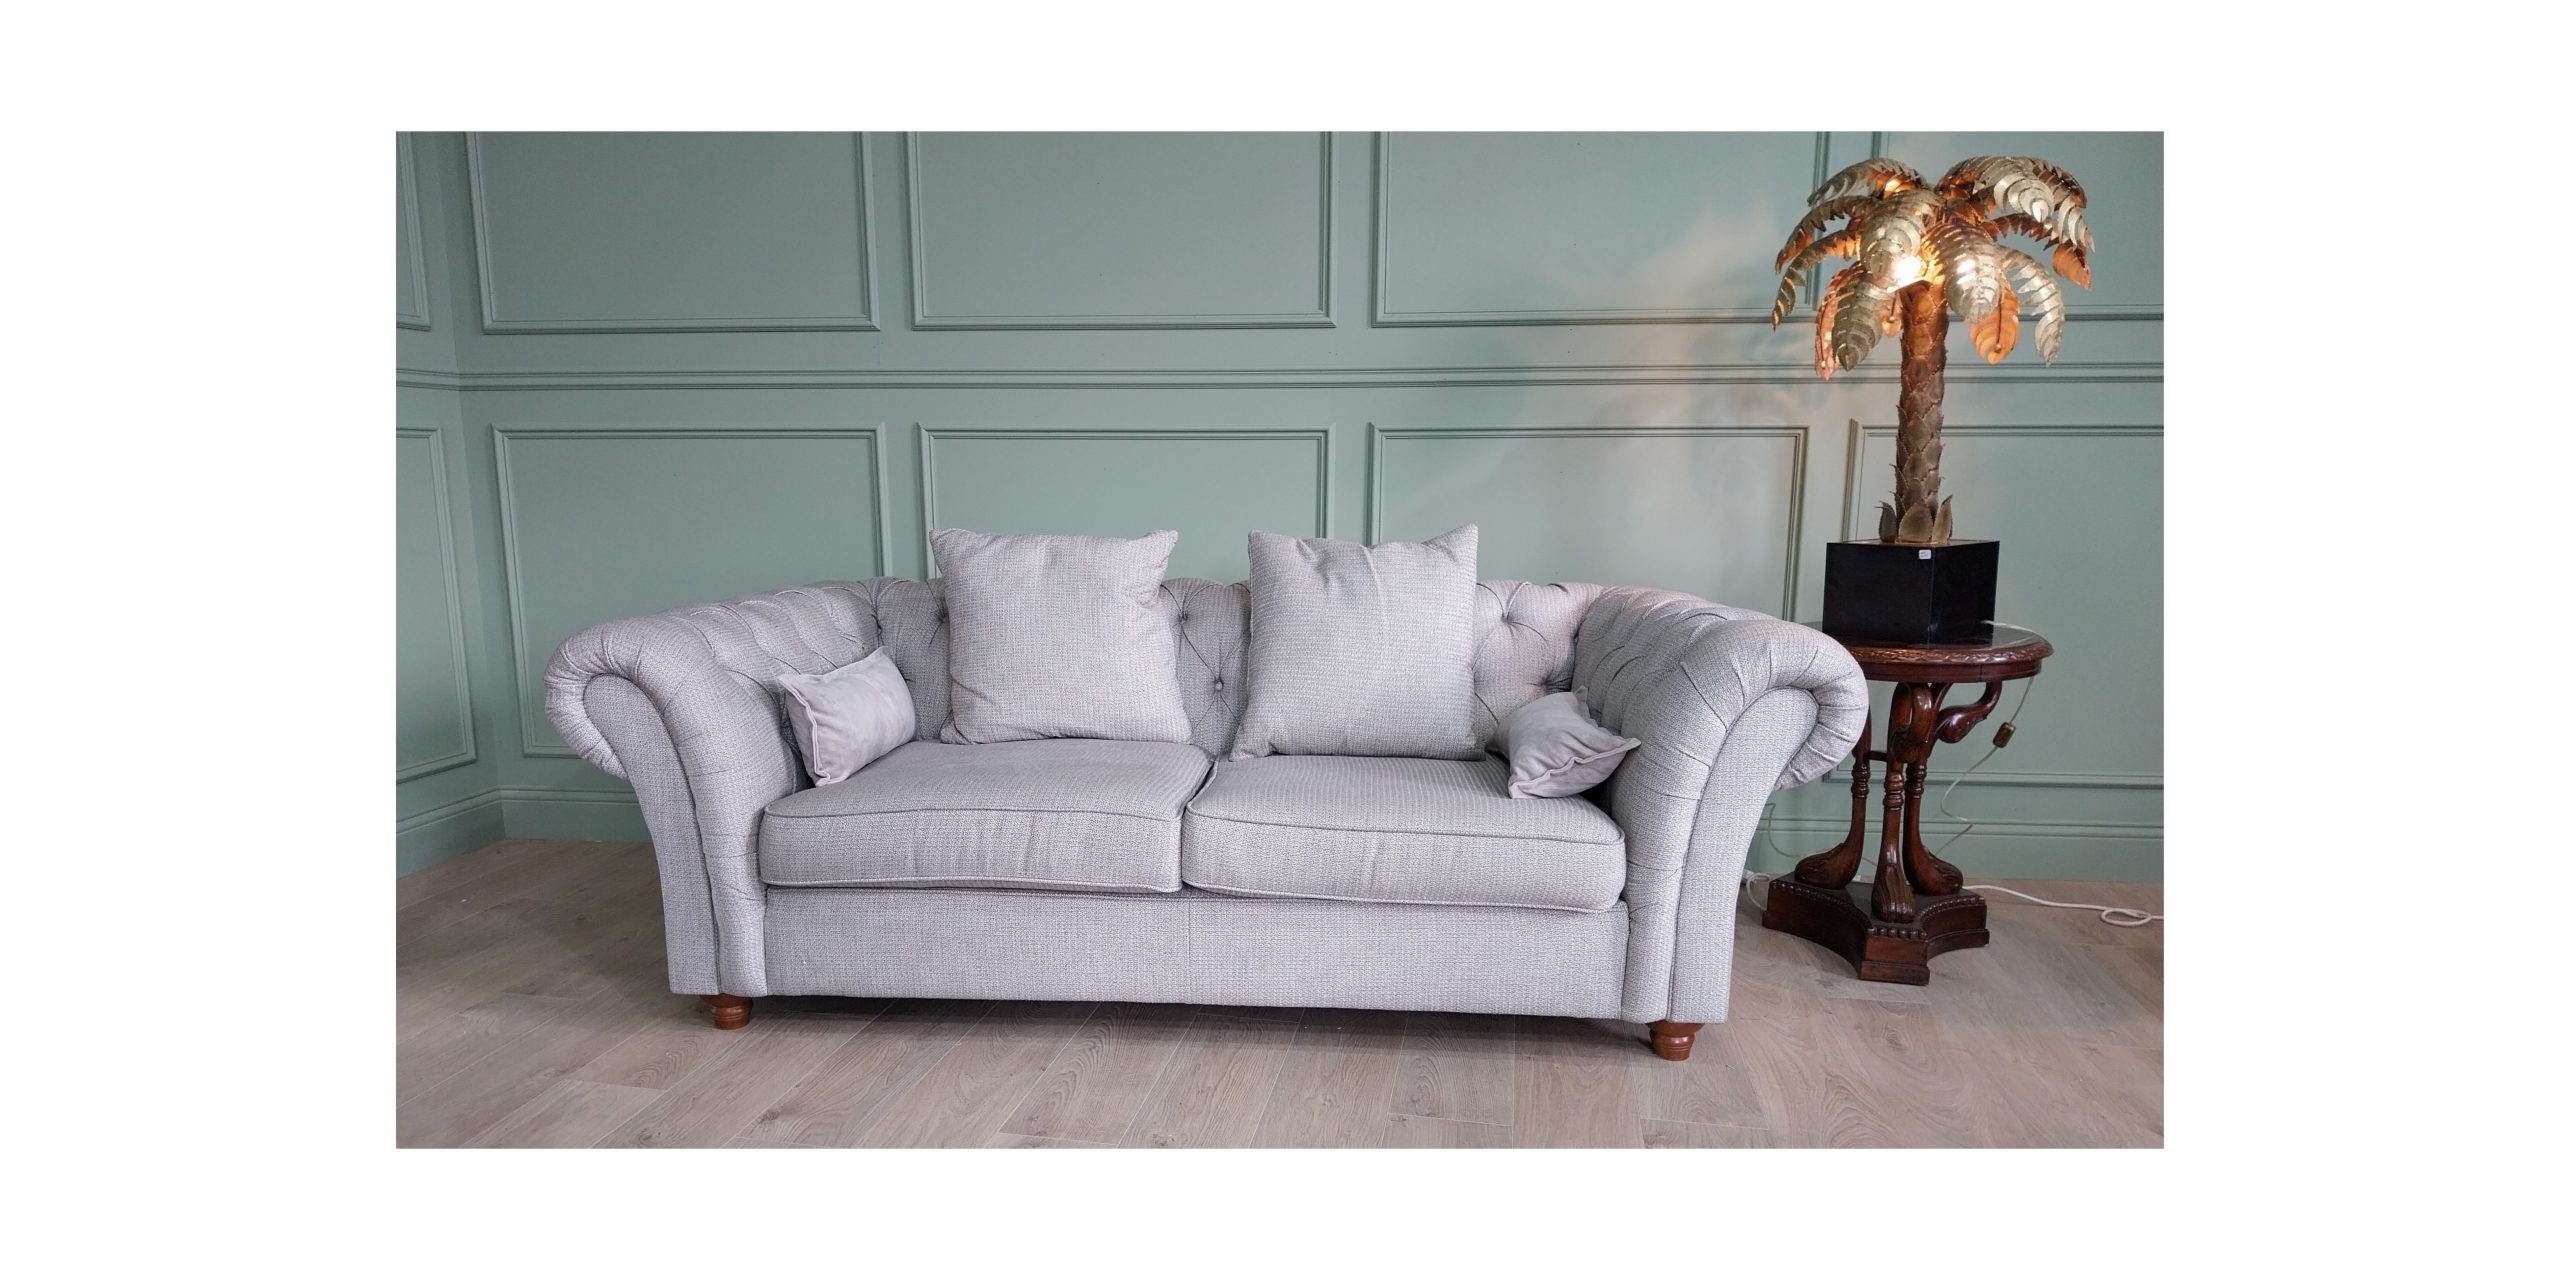 Good quality deep buttoned upholstered Chesterfield sofa